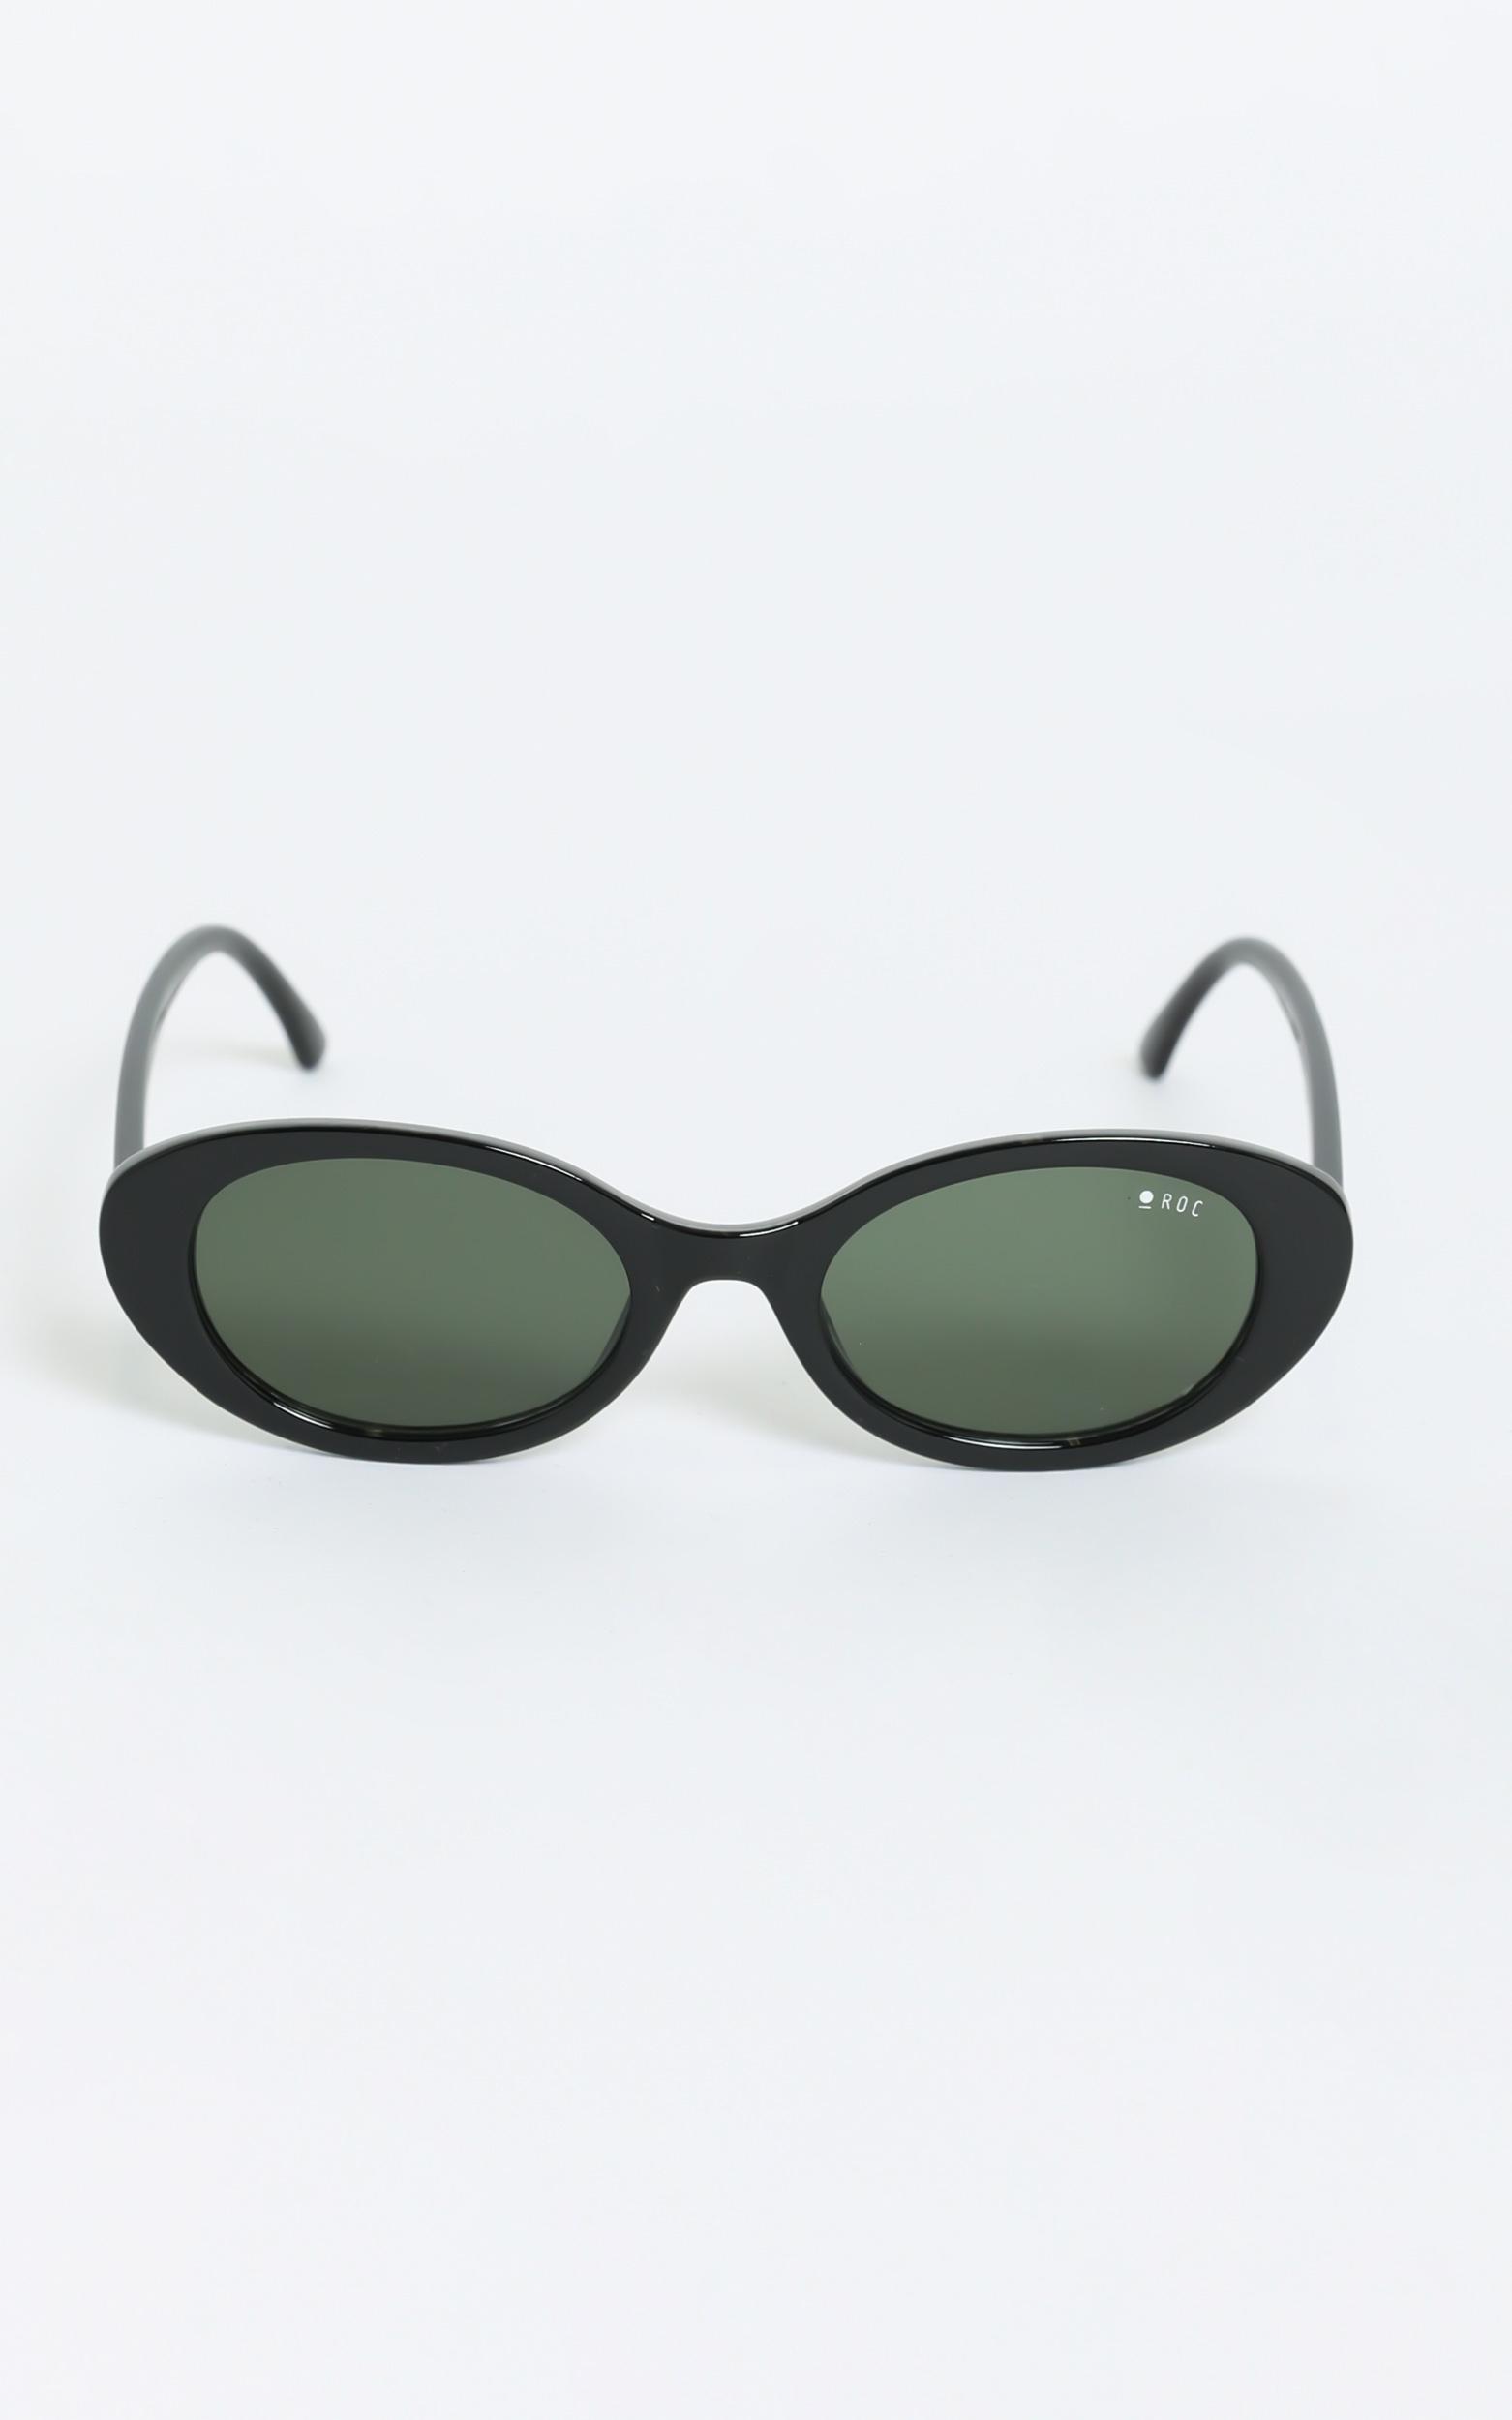 Roc - Flirty Sunglasses in Black, , hi-res image number null